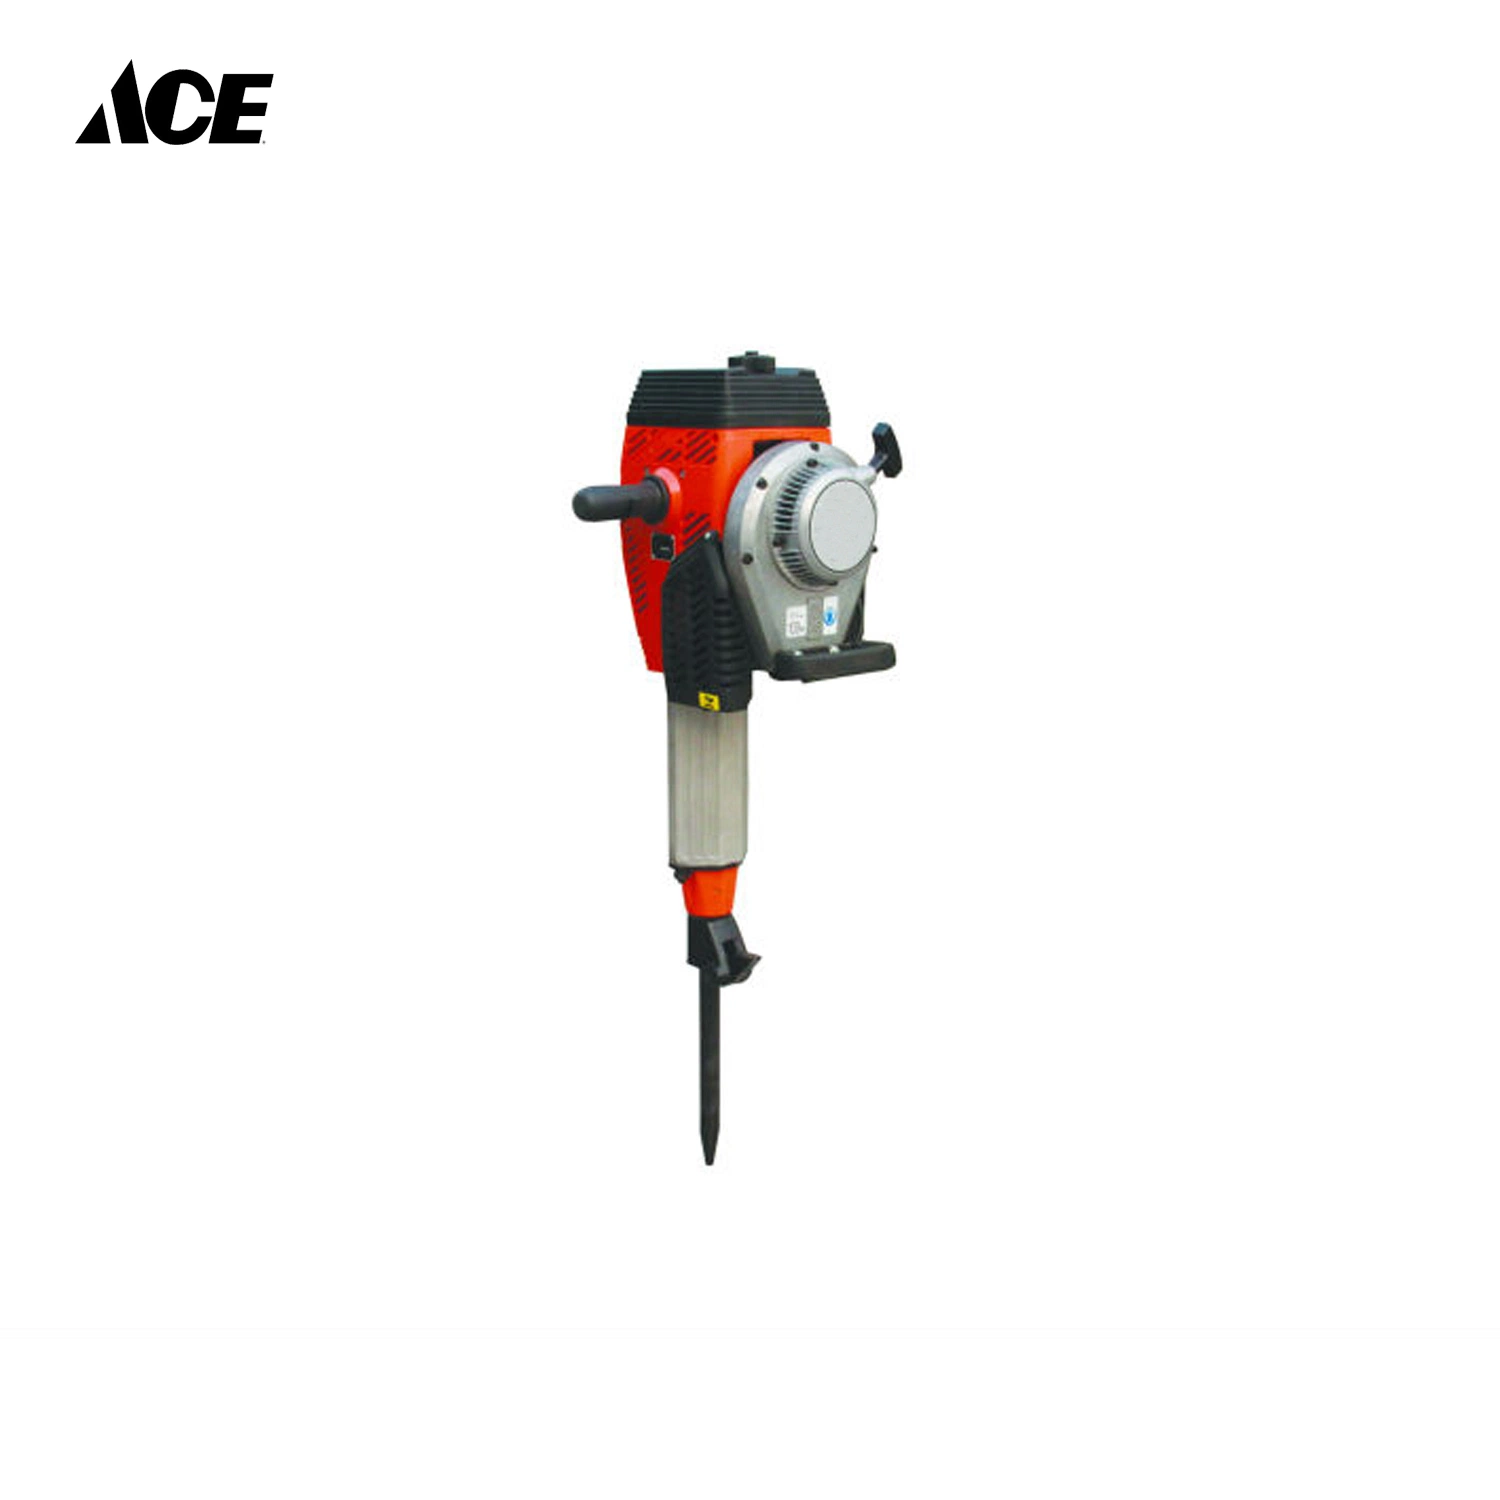 Concrete Tool Wood Steel Hammer Drill, Demolition Hammer Spare Parts Rotary Hammer